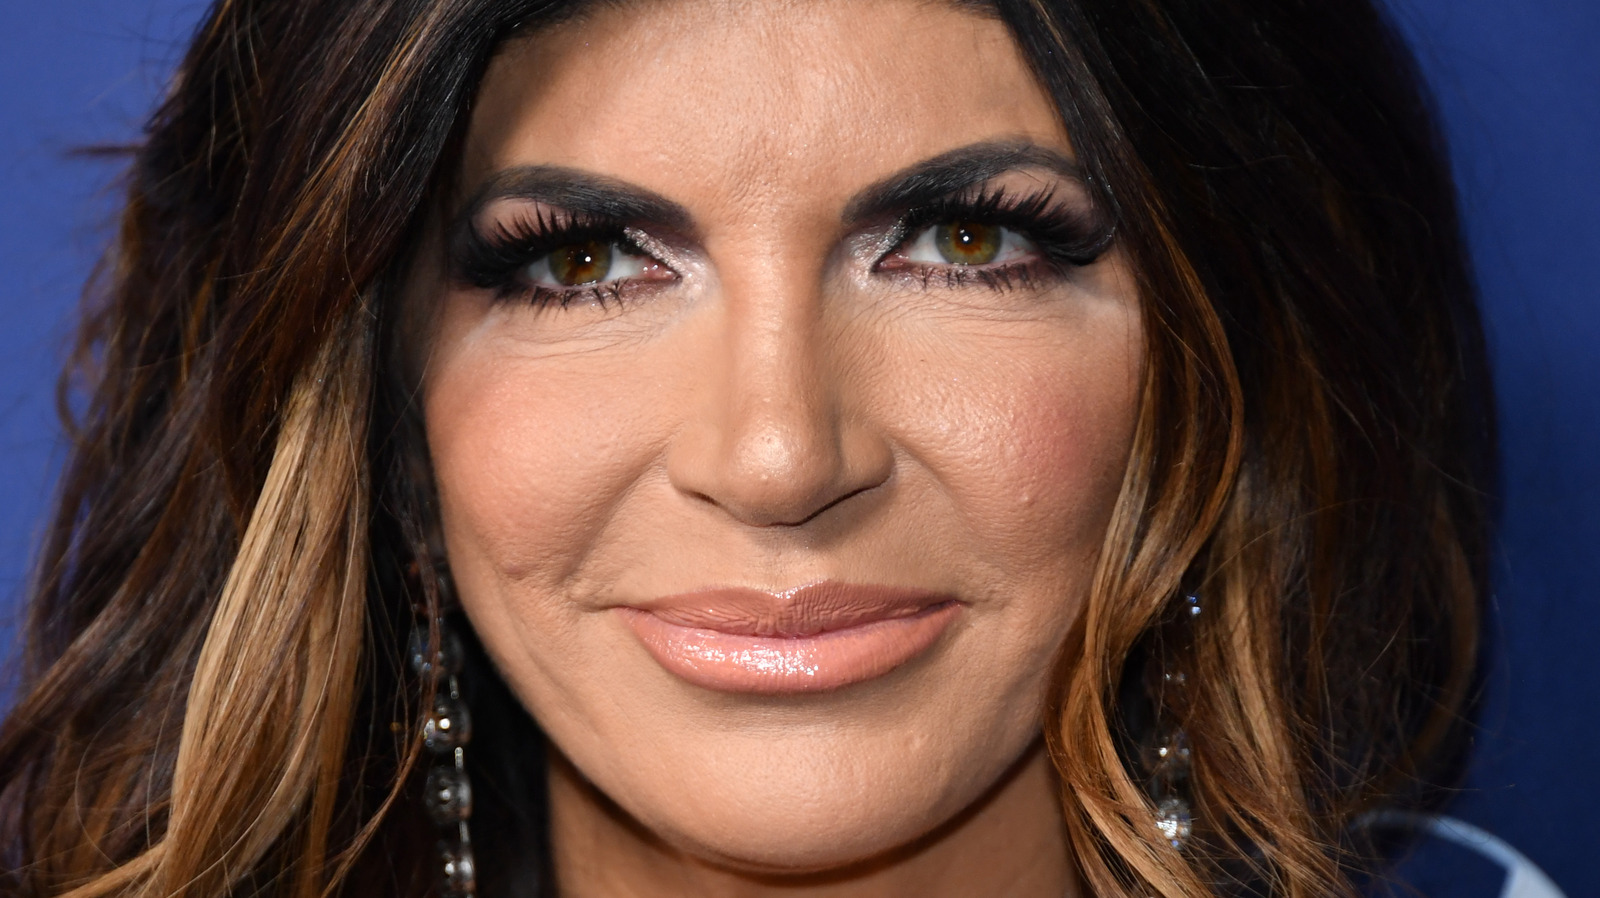 A Psychic Just Told Teresa Giudice This About Her Boyfriend